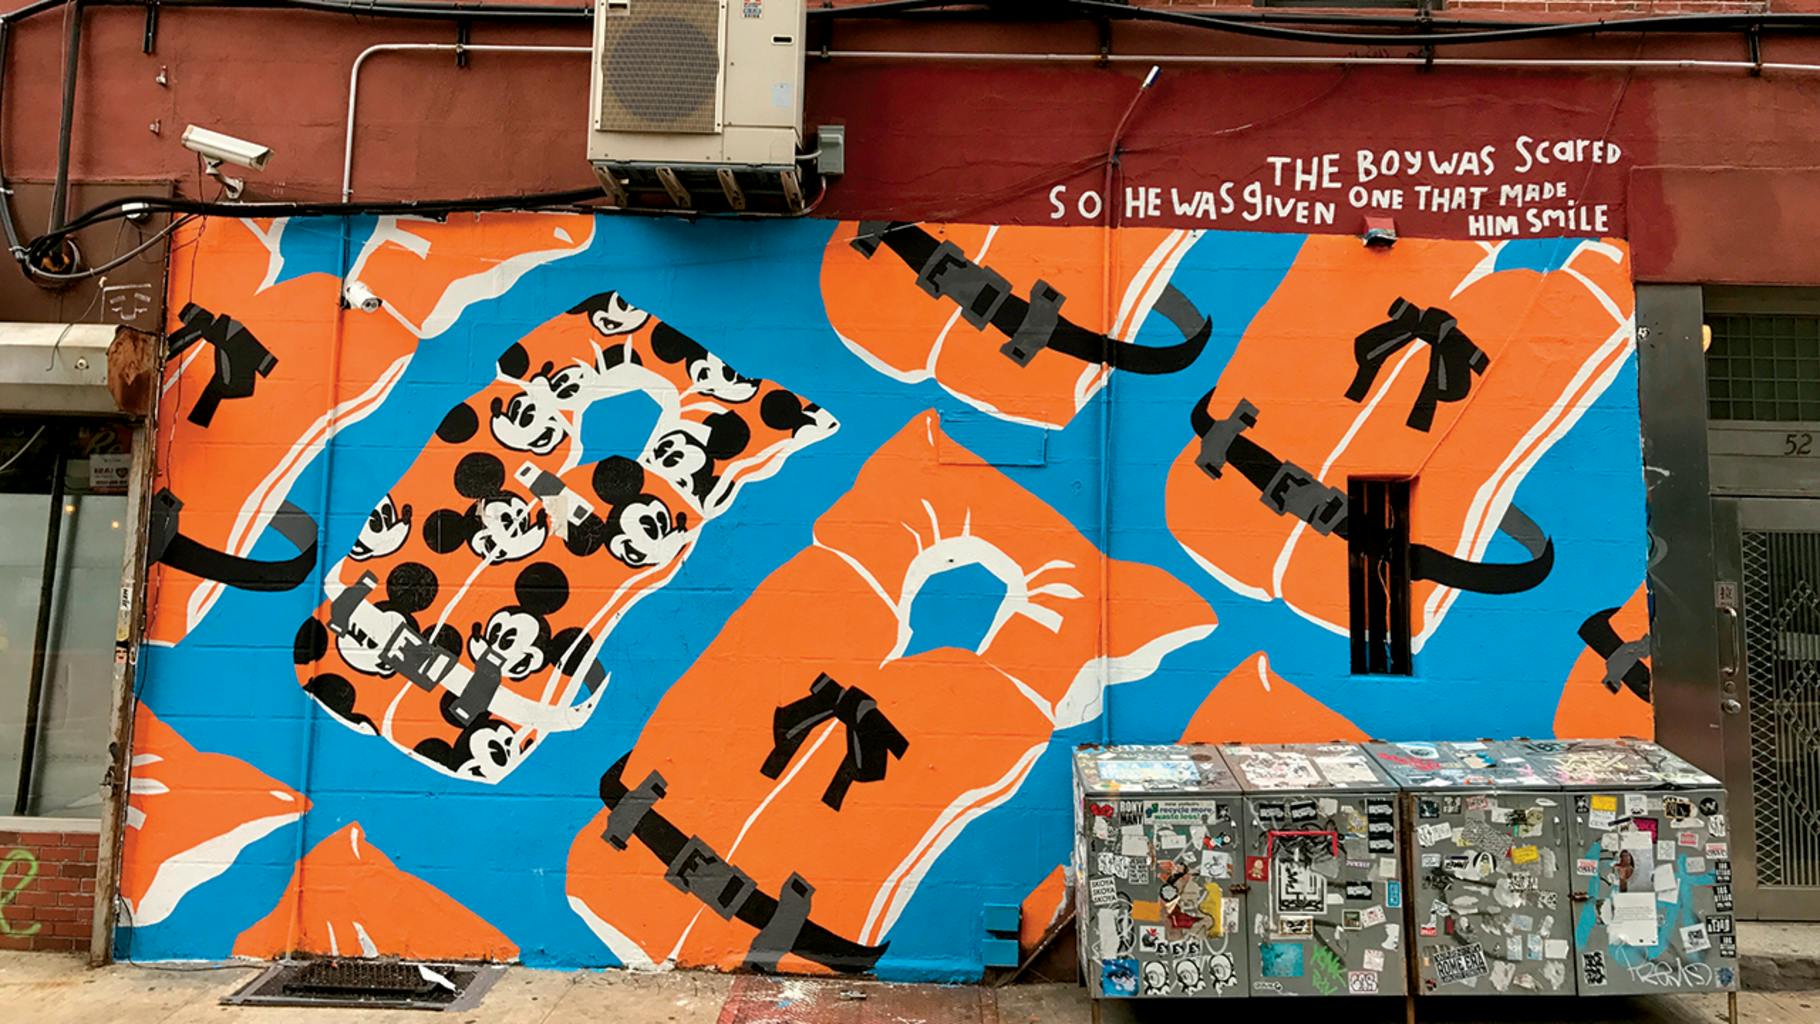 Sink or Swim by artist Adam Lucas was originally done in paint on bleached denim. He was later asked to reproduce the painting as a mural in New York City, as shown here. The work was inspired by an incident in May 2017 off the coast of Libya, when a boat overloaded with some 200 migrants capsized while attempting to reach Europe. Though many were rescued, several dozen died -- reportedly, most of them were very young children. The piece is in response to one specific disaster, but it can be applied to any number of refugee crises. The artist asks us to imagine being part of a family living in an environment so dire that the best hope lies across the uncertain sea. The Mickey Mouse life vest, representing joy and innocence, references an actual child making the journey as well as blameless youth being forced into a situation of such severity. Loss of childhood at best, loss of life at worst.